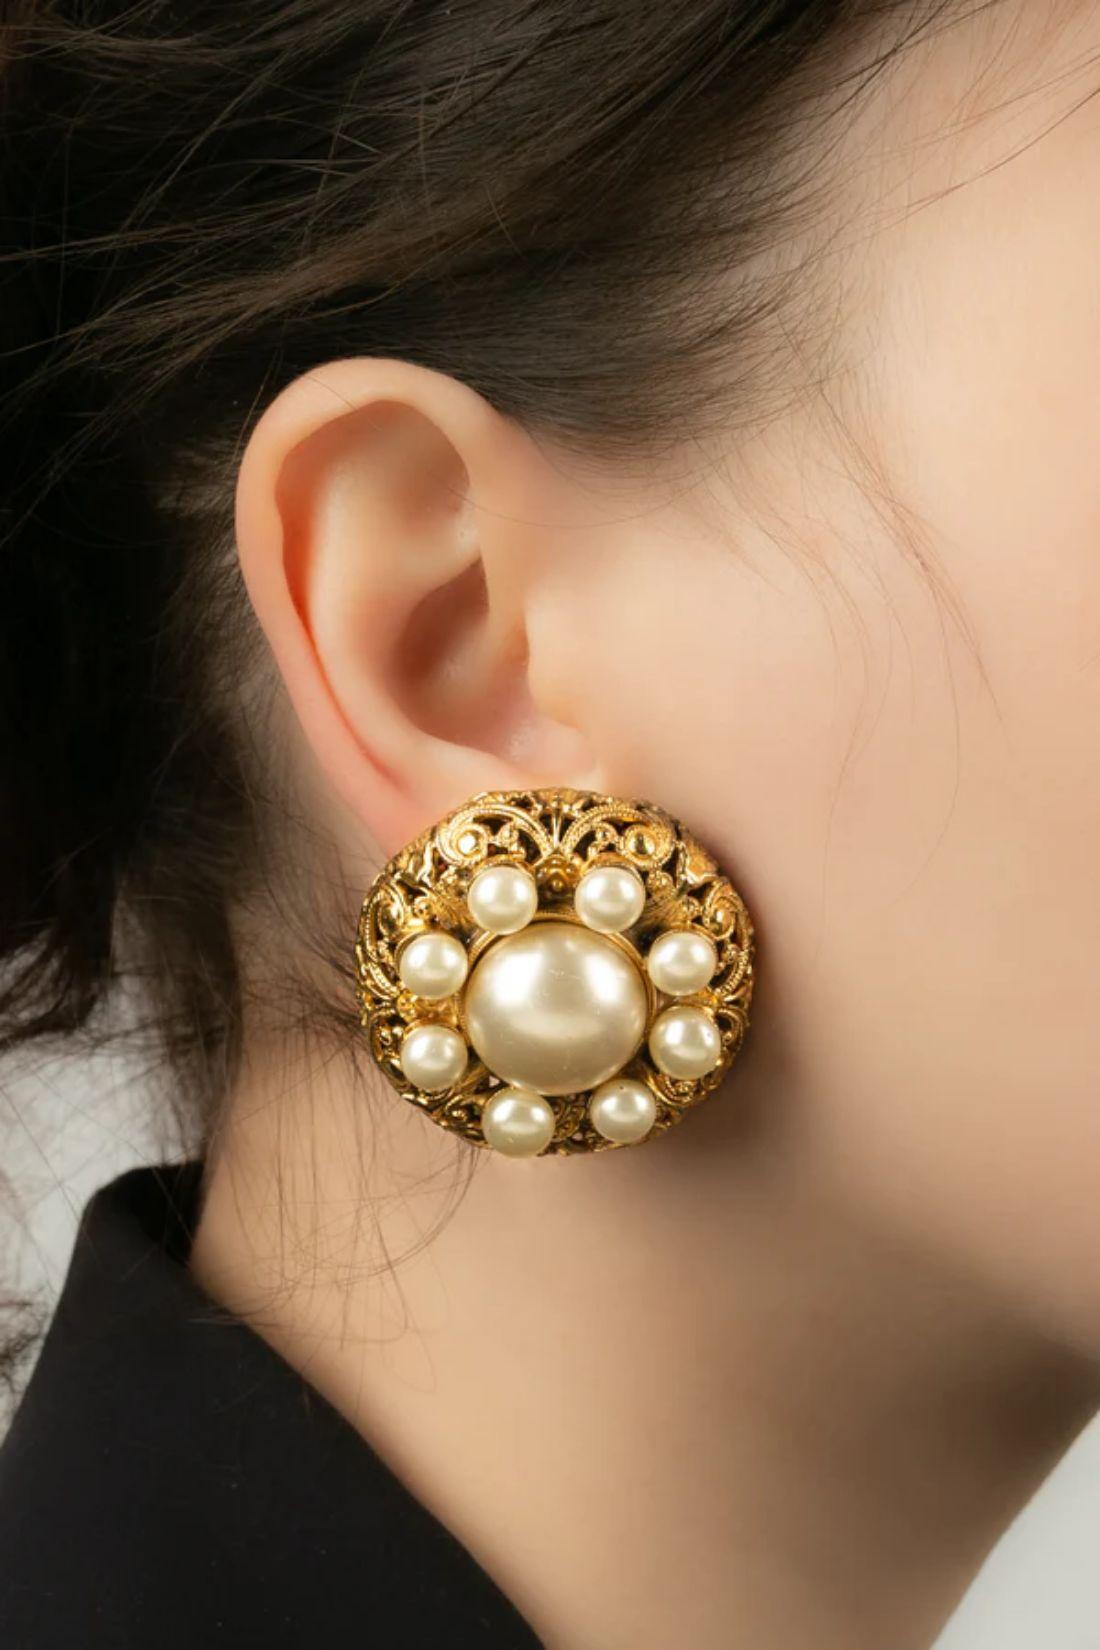 Chanel - Earrings in gold-plated metal and with pearly glass cabochons. To be noted, the presence of verdigris on the back of the jewel.

Additional information:
Dimensions: Ø 3.5 cm
Condition: Very good condition
Seller Ref number: BOB33